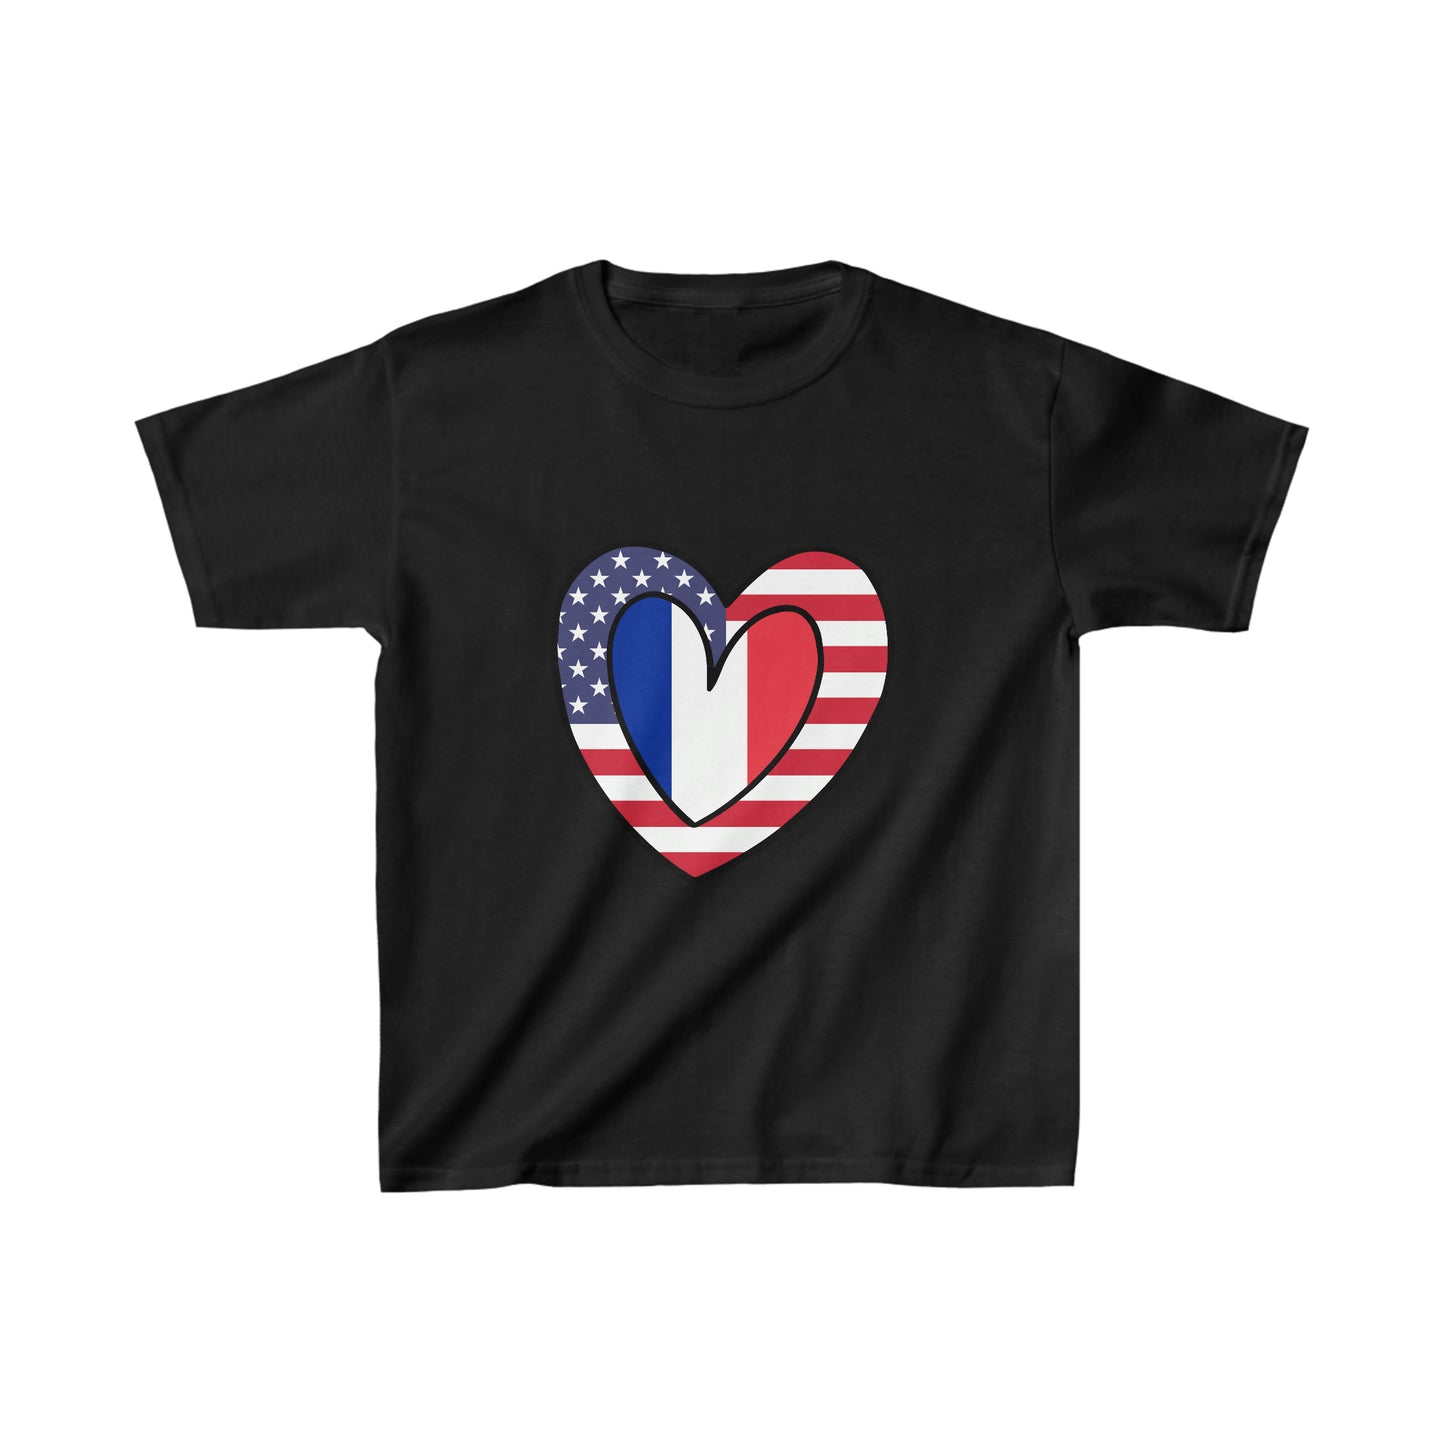 Kids French American Heart Valentines Day Gift Half France USA Flag T-Shirt | Unisex Tee Shirt